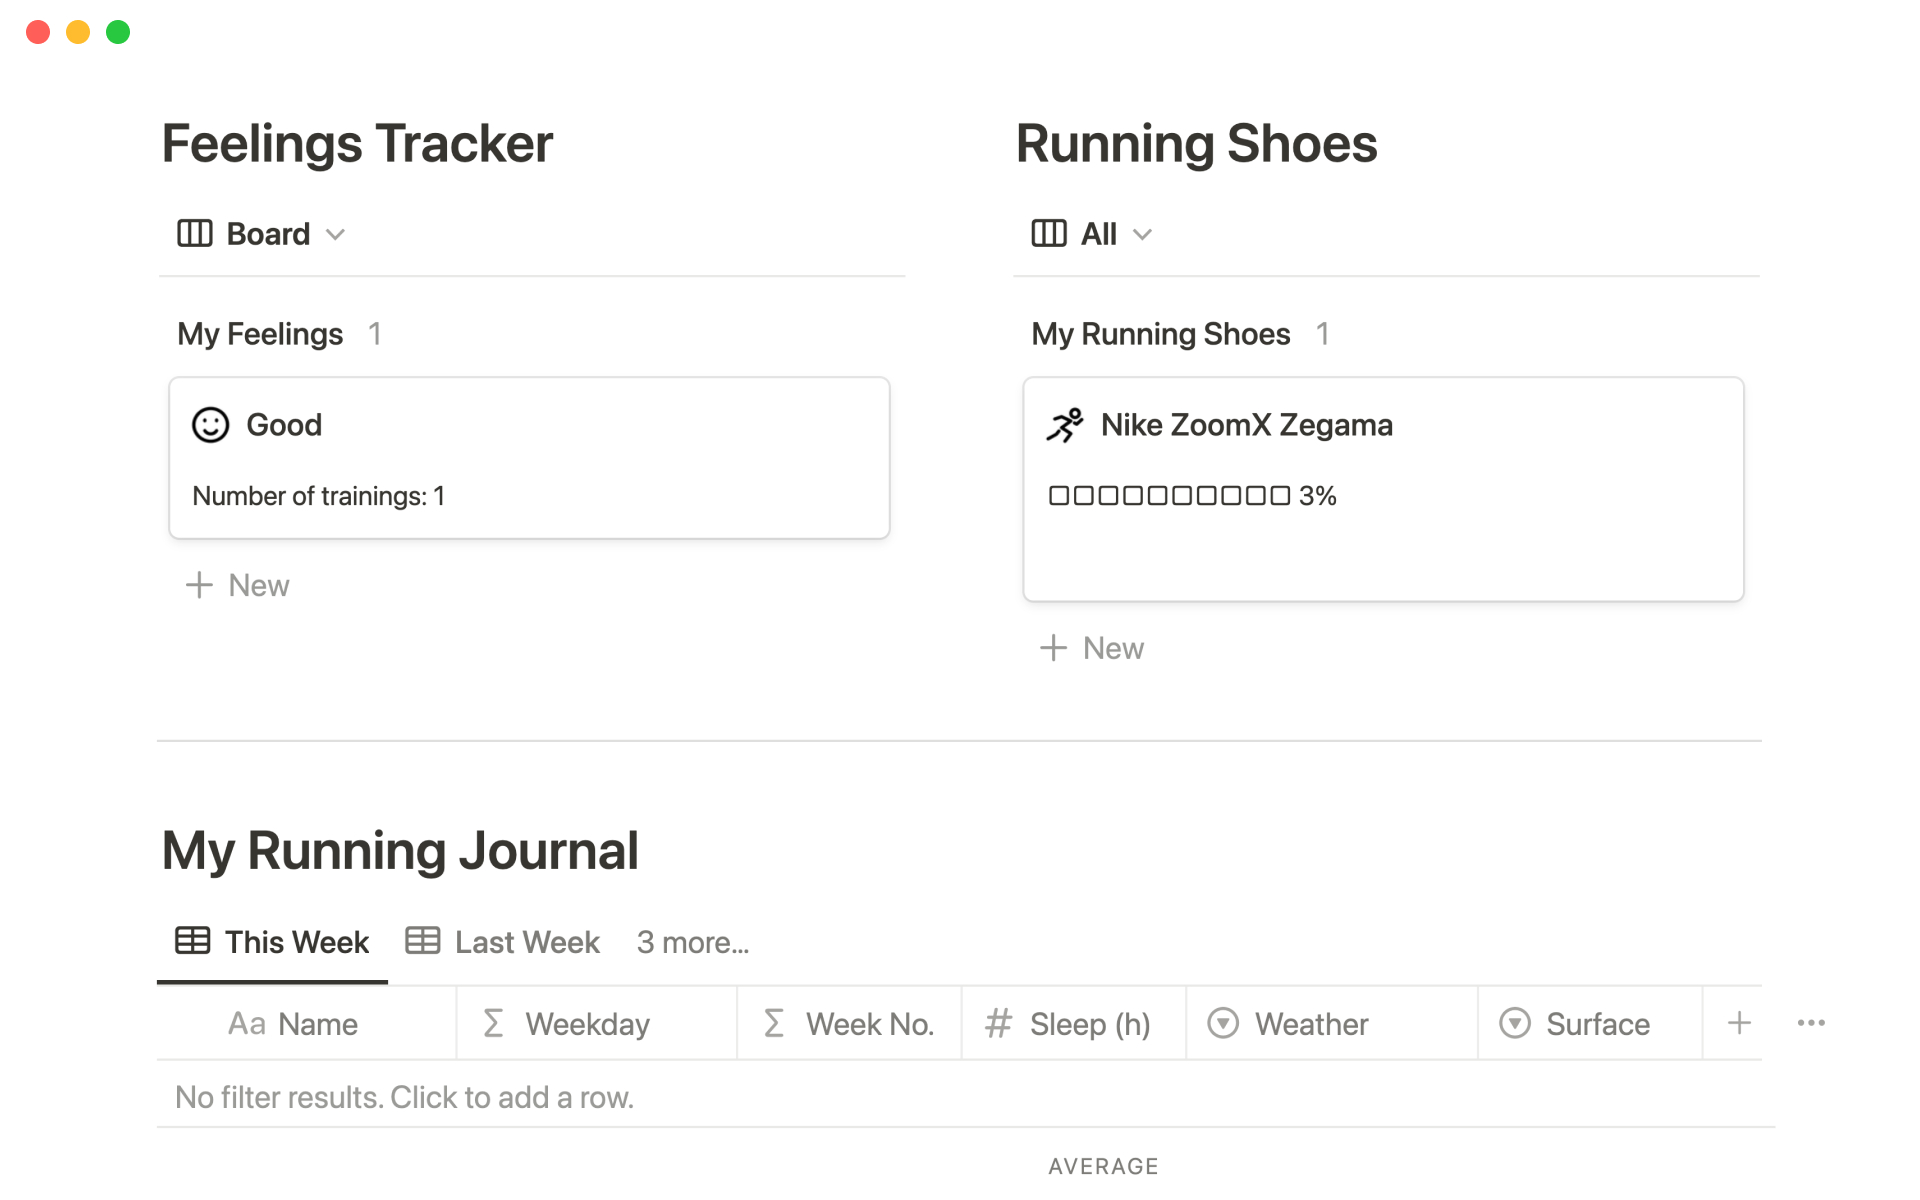 It helps you keep track of your running progress week-to-week.